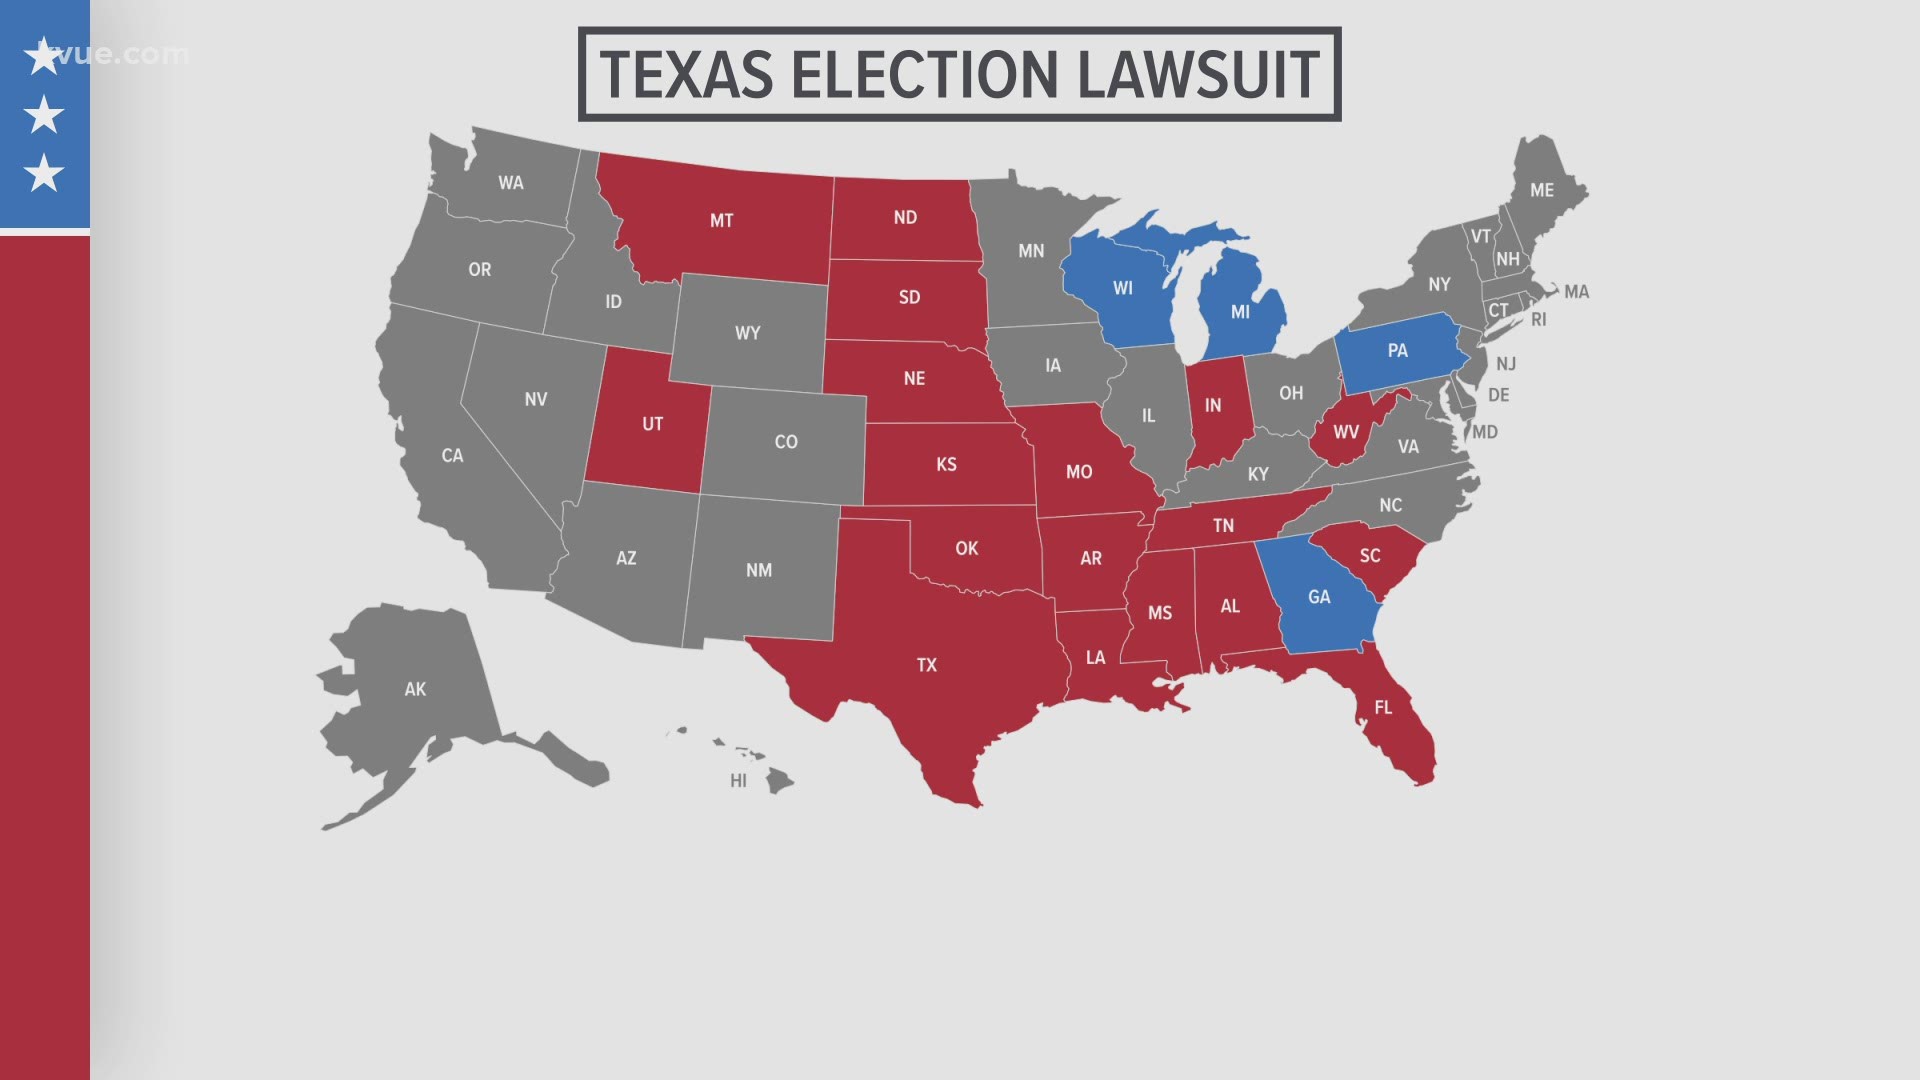 Six states have officially joined Texas in its lawsuit challenging the 2020 election results in four battleground states.